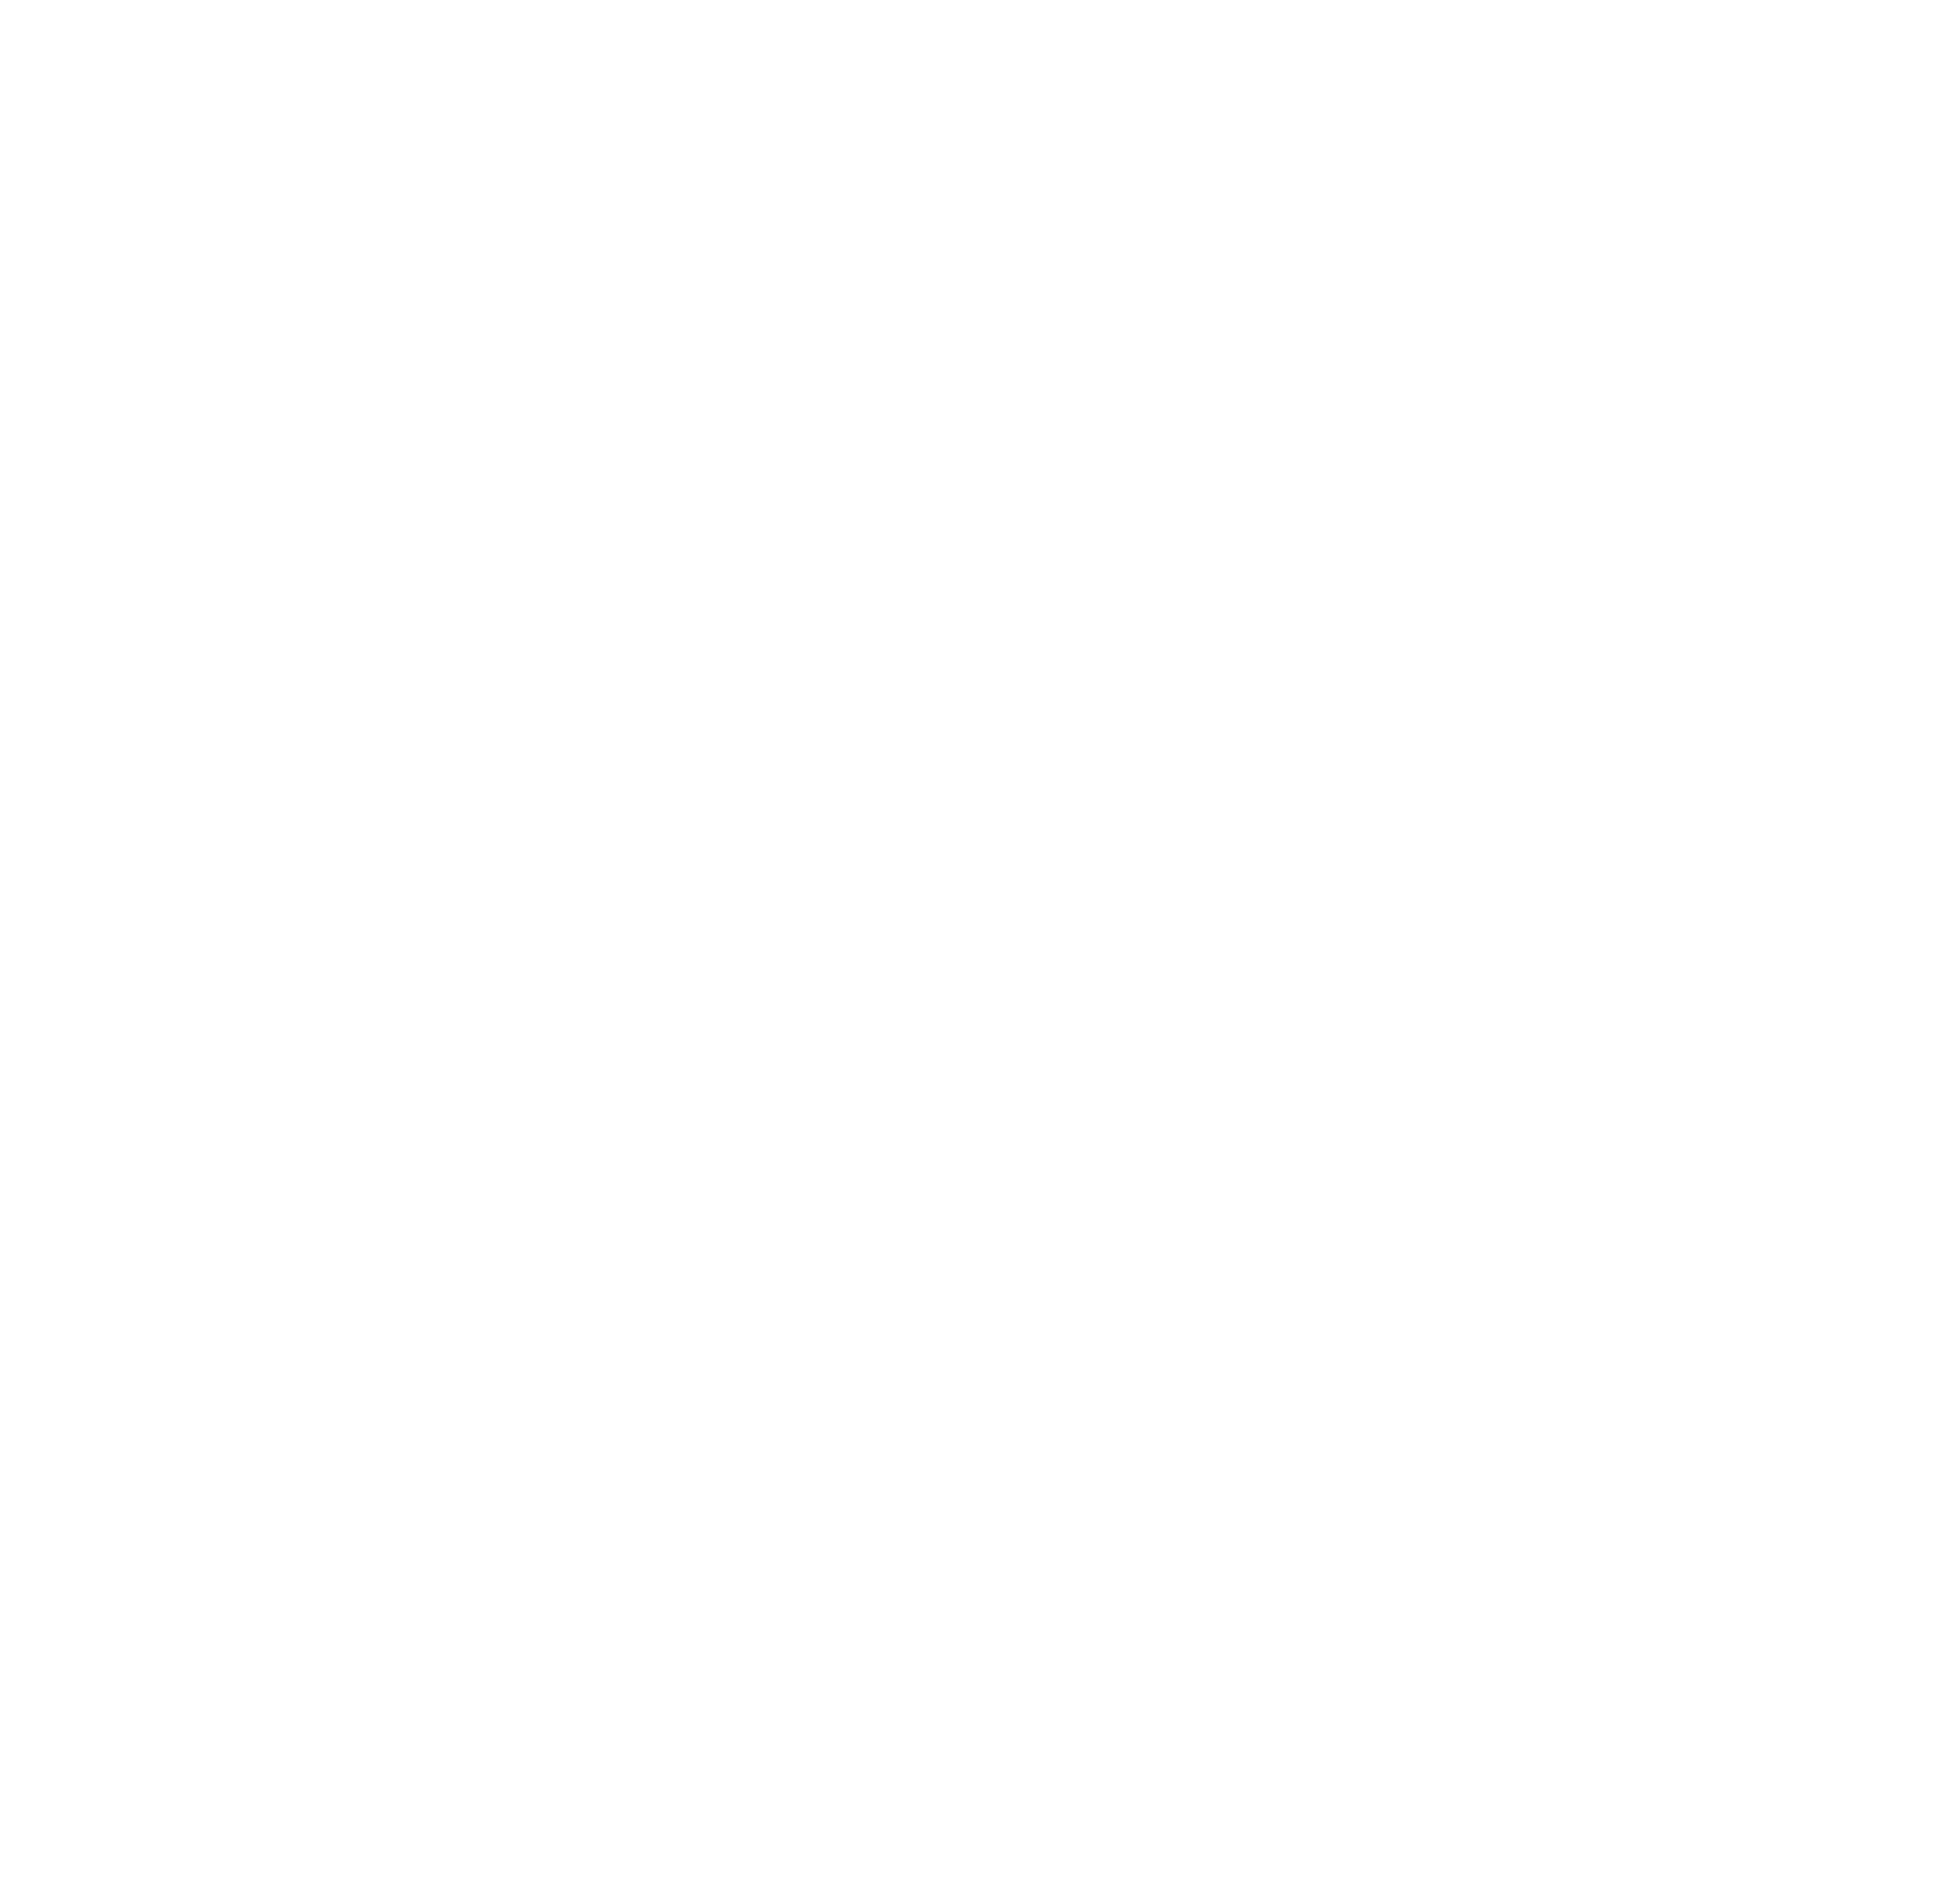 bus_icon_grey.png